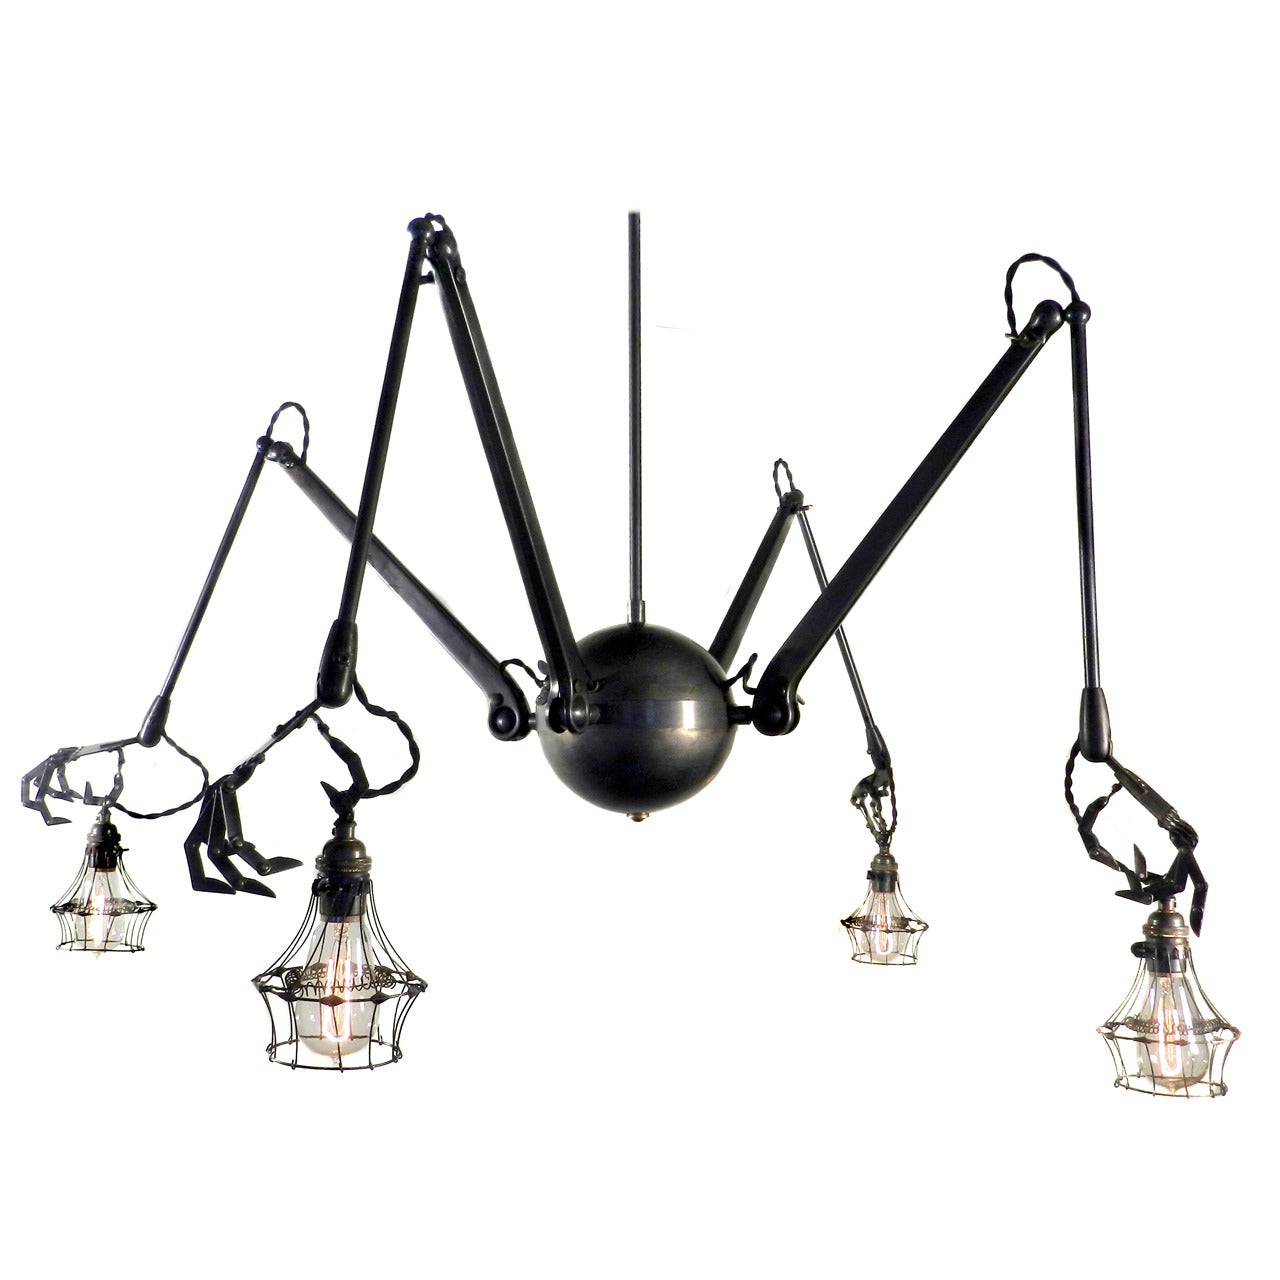 Striking and Bizarre Four-Handed Chandelier